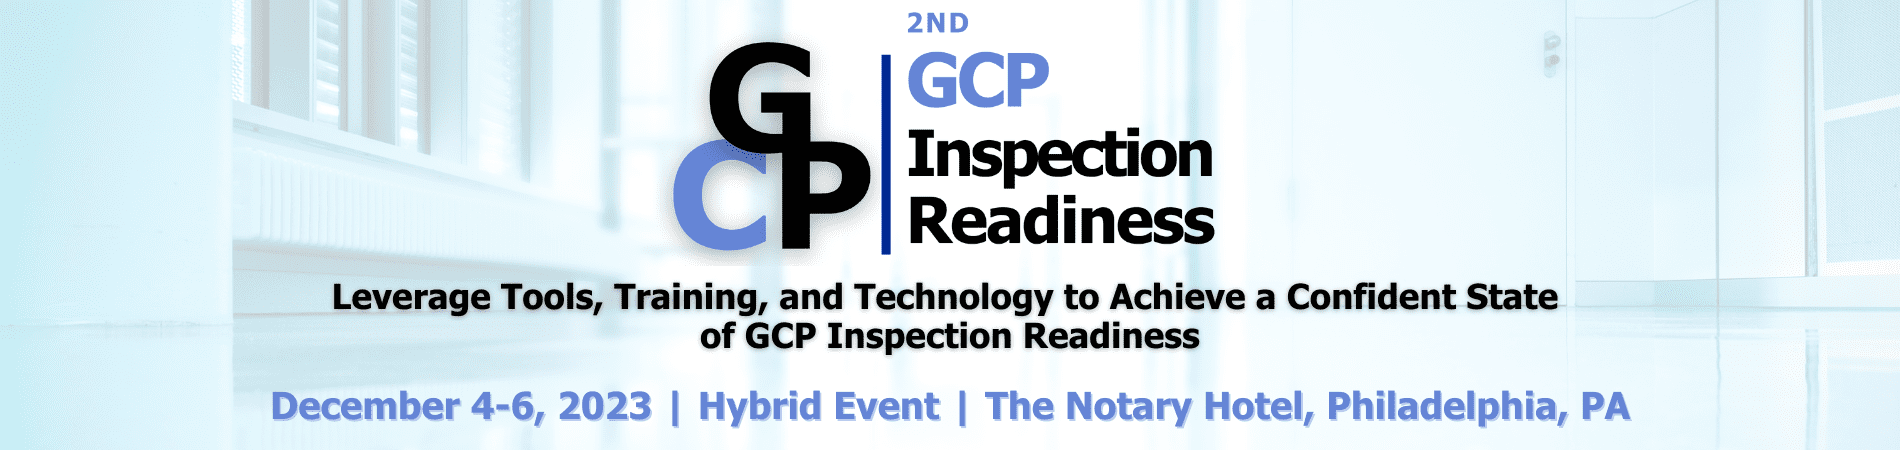 2nd GCP Inspection Readiness, Leverage Tools, Training, and Technology to Achieve a Confident State of GCP Inspection Readiness, December 4-6, 2023, Hybrid Event, Philadelphia